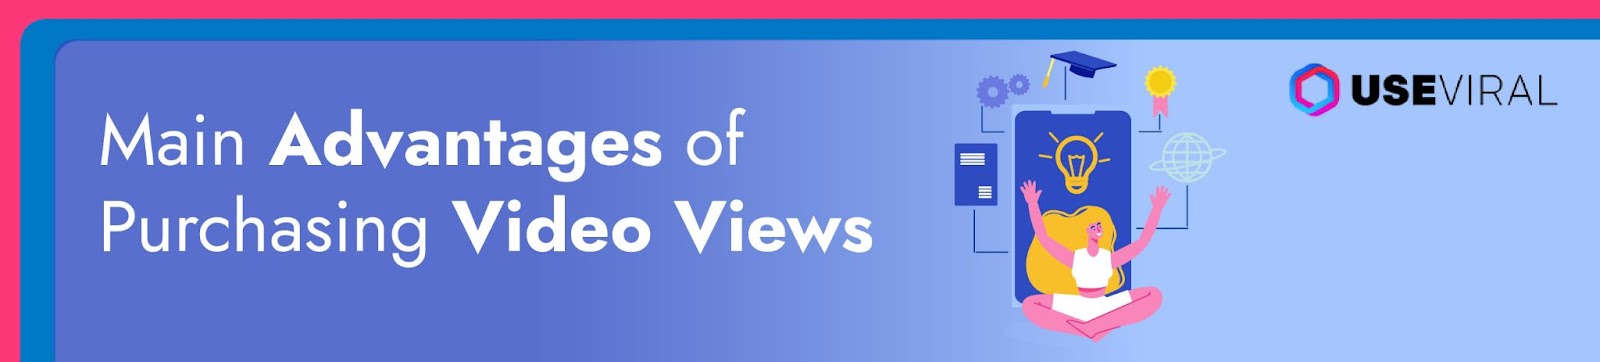 Main Advantages of Purchasing Video Views